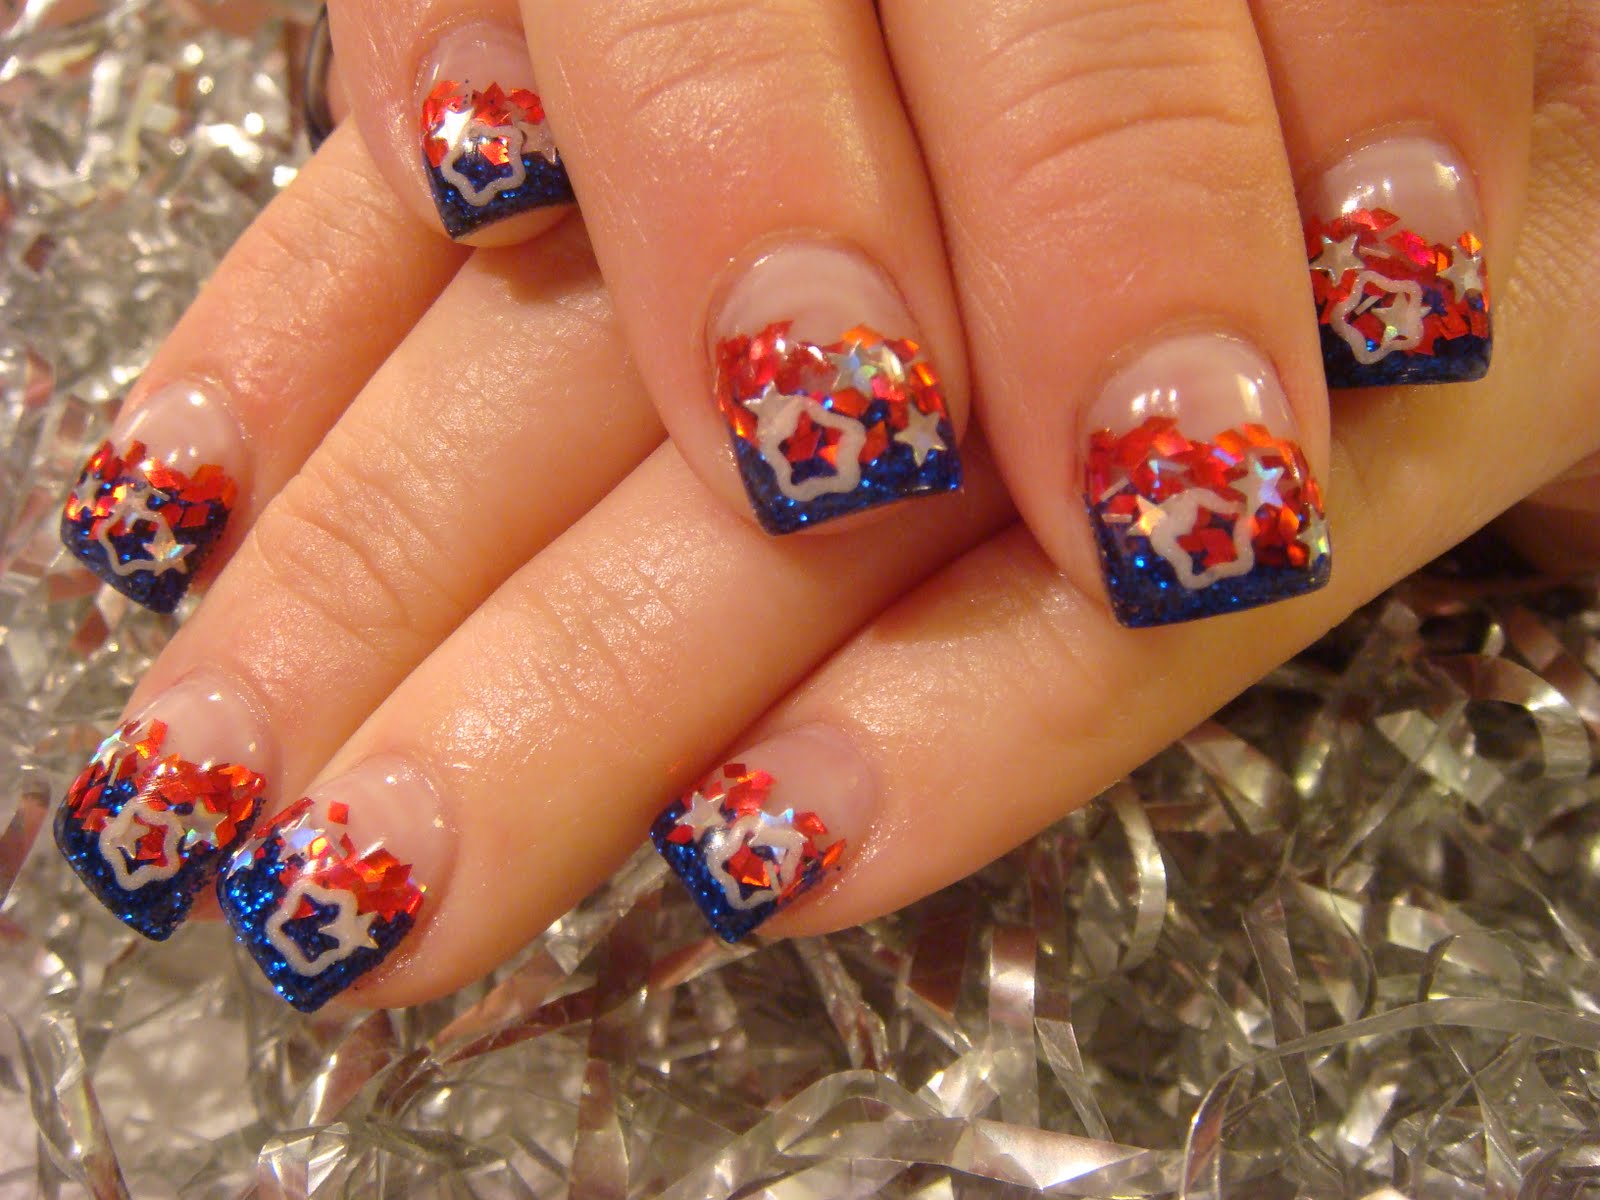 More 4th of July nails. The white stars are made with an impression 